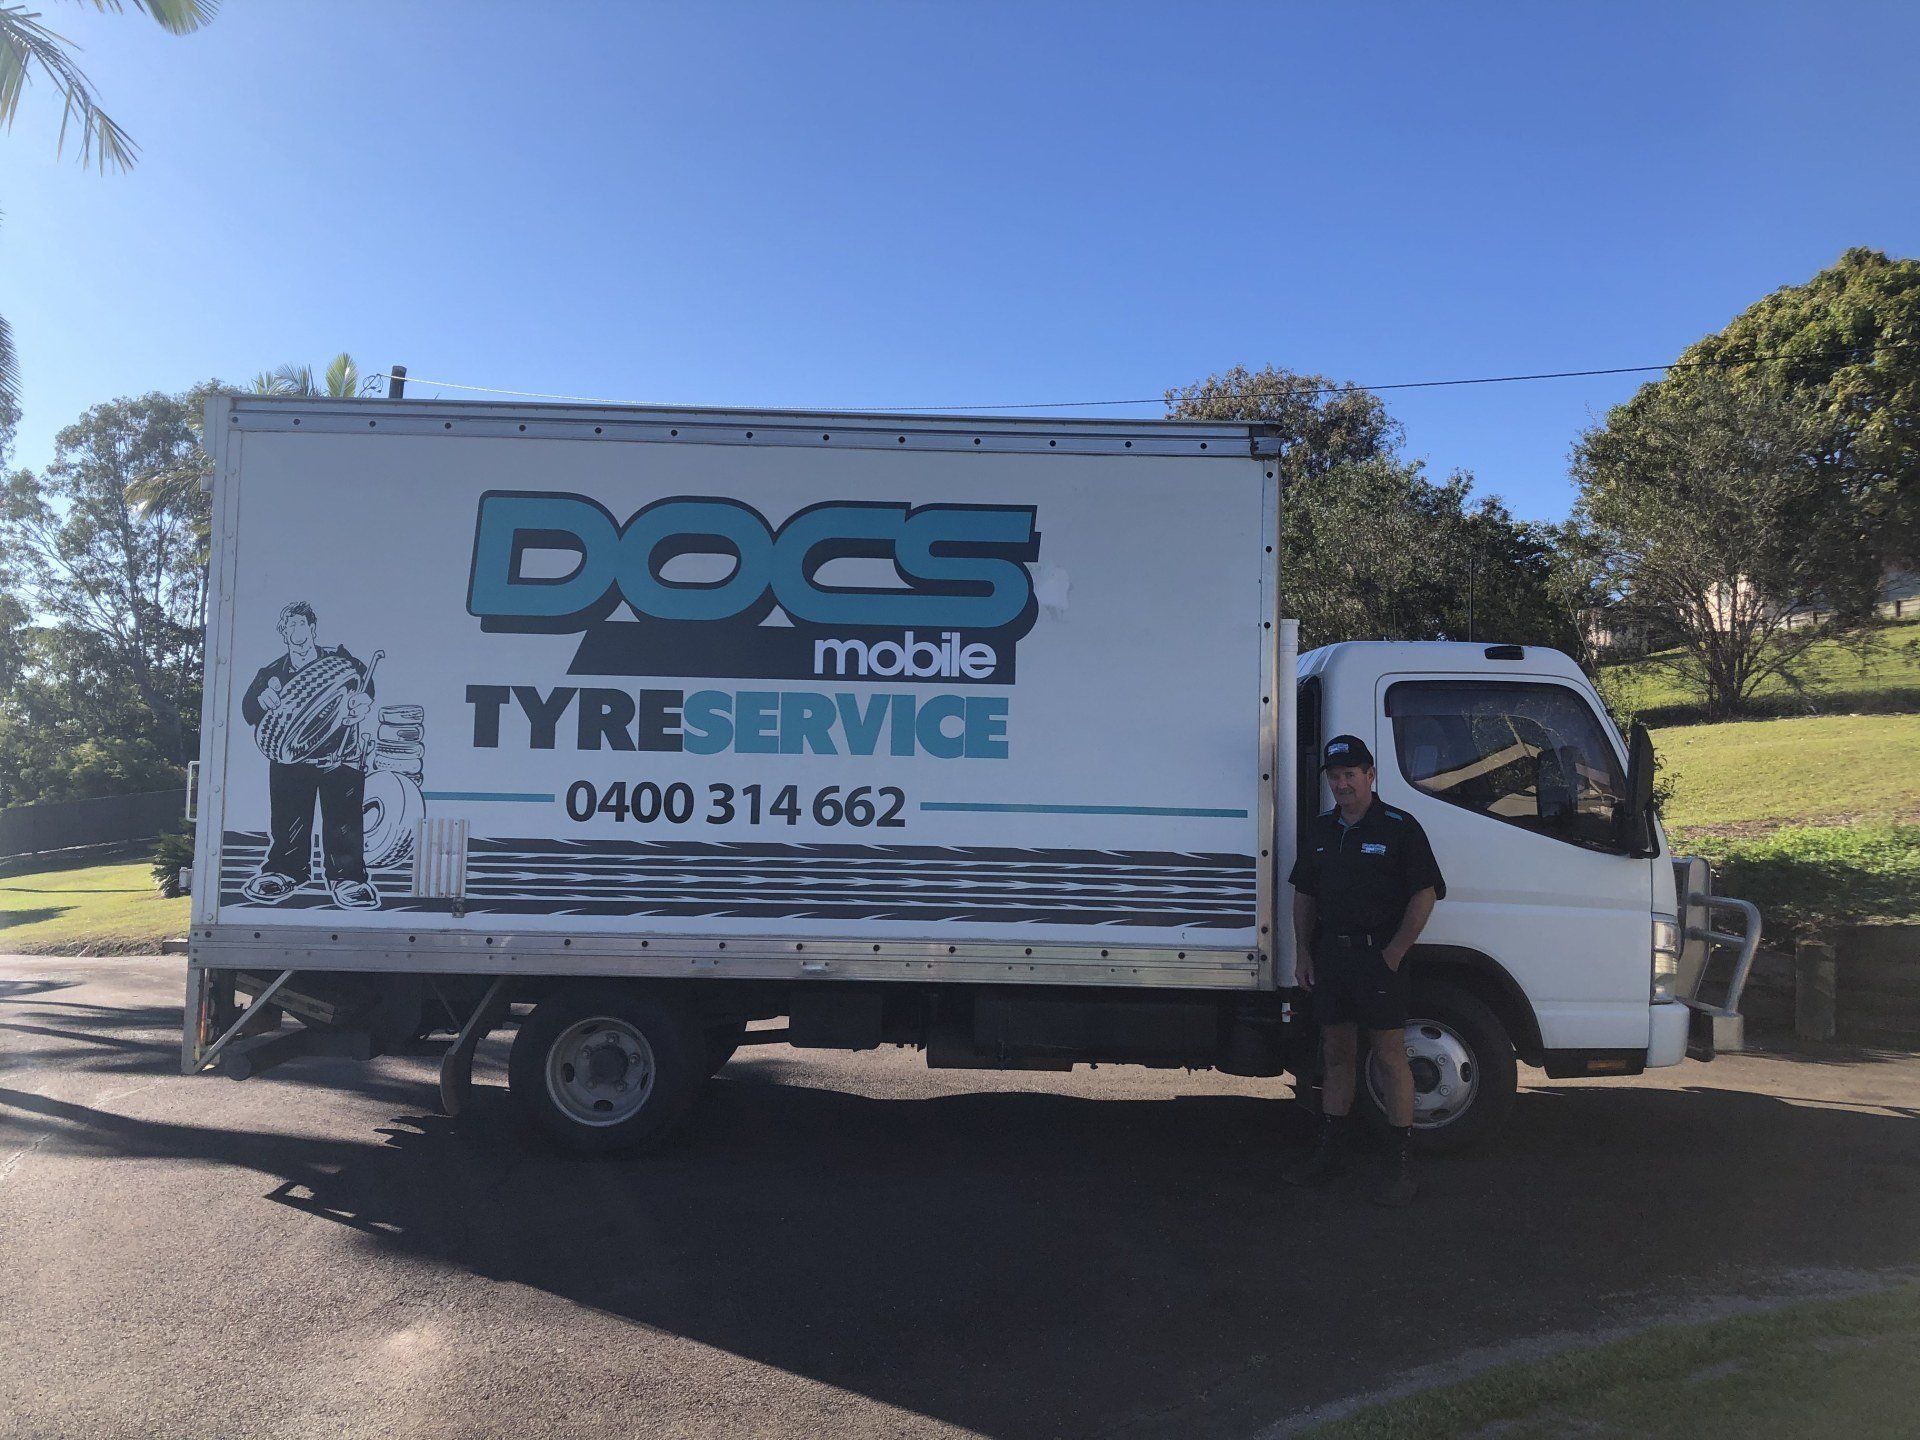 Tyre Service Truck — Mobile Tyre Service In Sunshine Coast, QLD